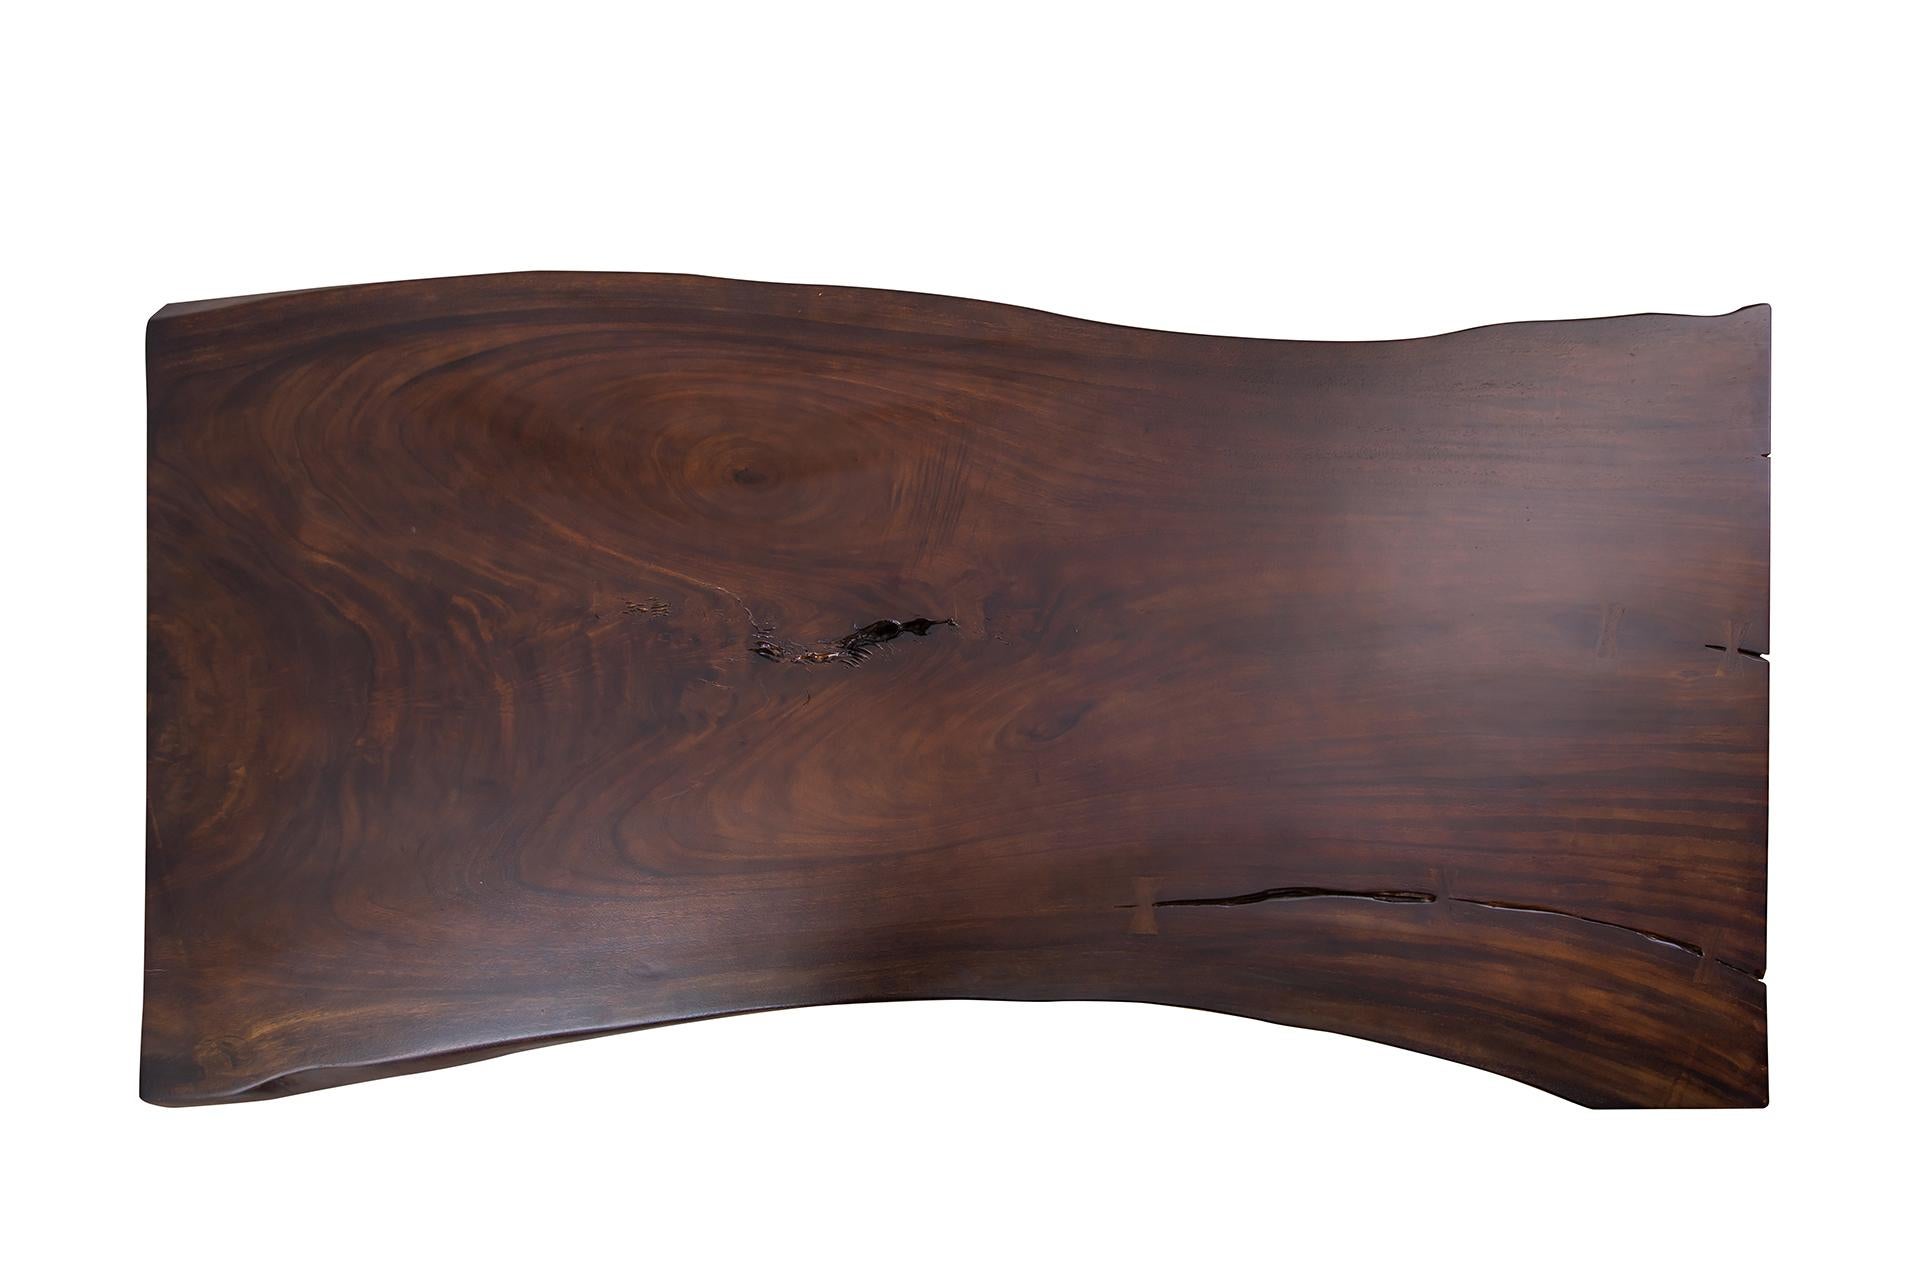 Hand-Crafted Siam Walnut/Acacia Live Edge Limited Edition Slab Table in Smooth Dark Chocolate For Sale